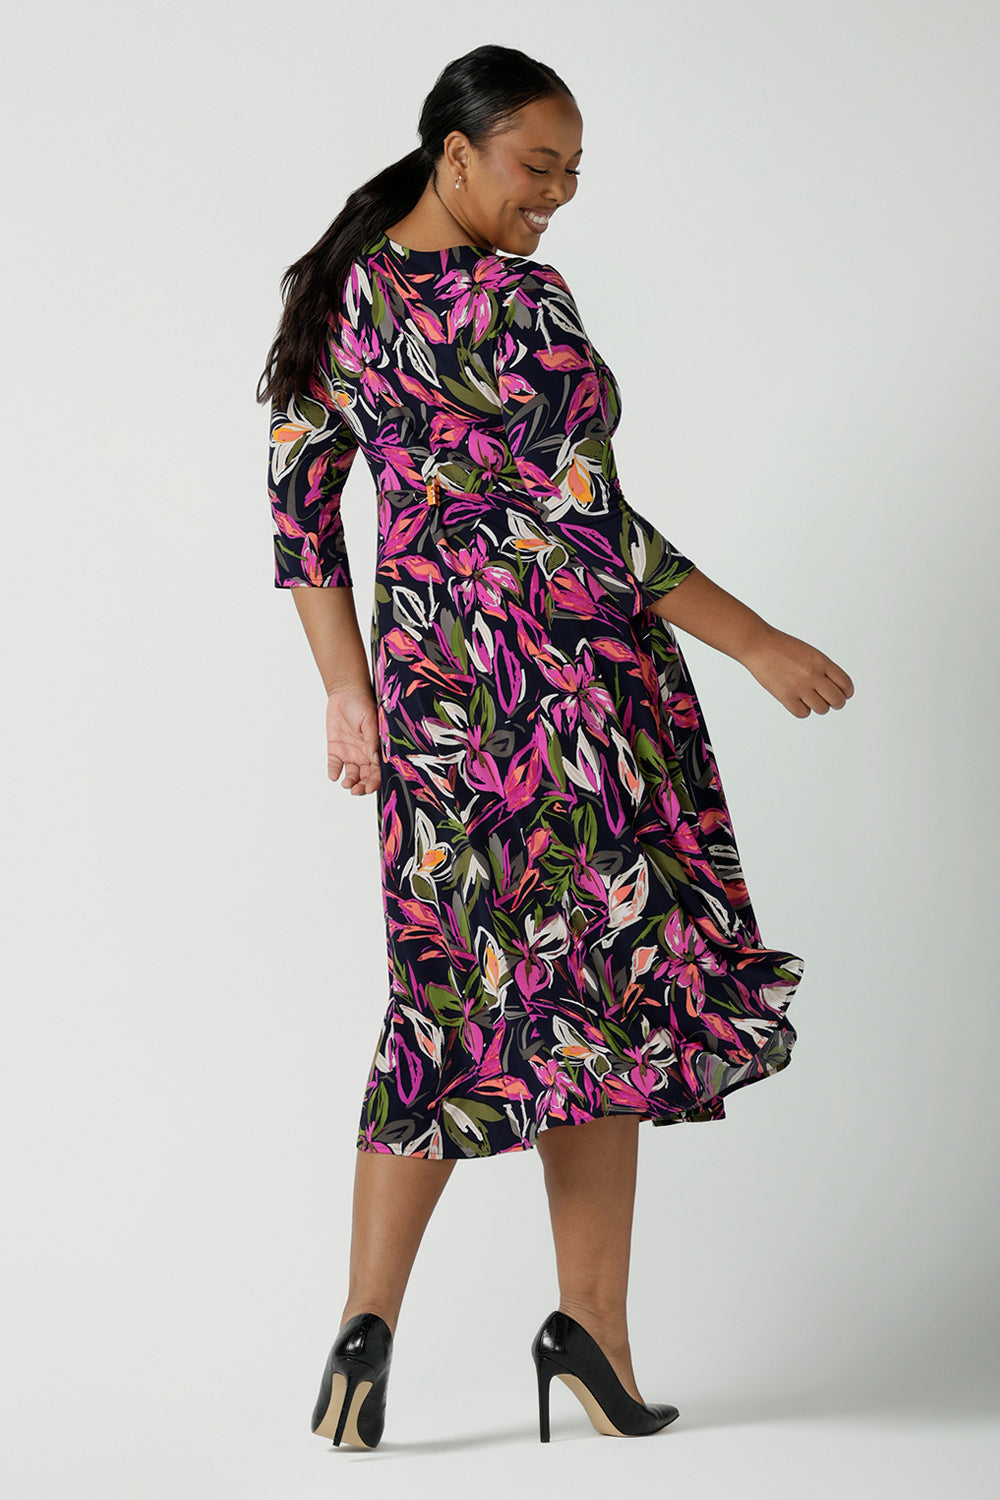 Back view of a size 16 woman wears a Kyra dress in Vivid Flora. Empire line fit and flare style with a 3/4 sleeve. Twist front neckline. Flattering shape for all sizes 8 - 24. Made in Australia for corporate casual women.